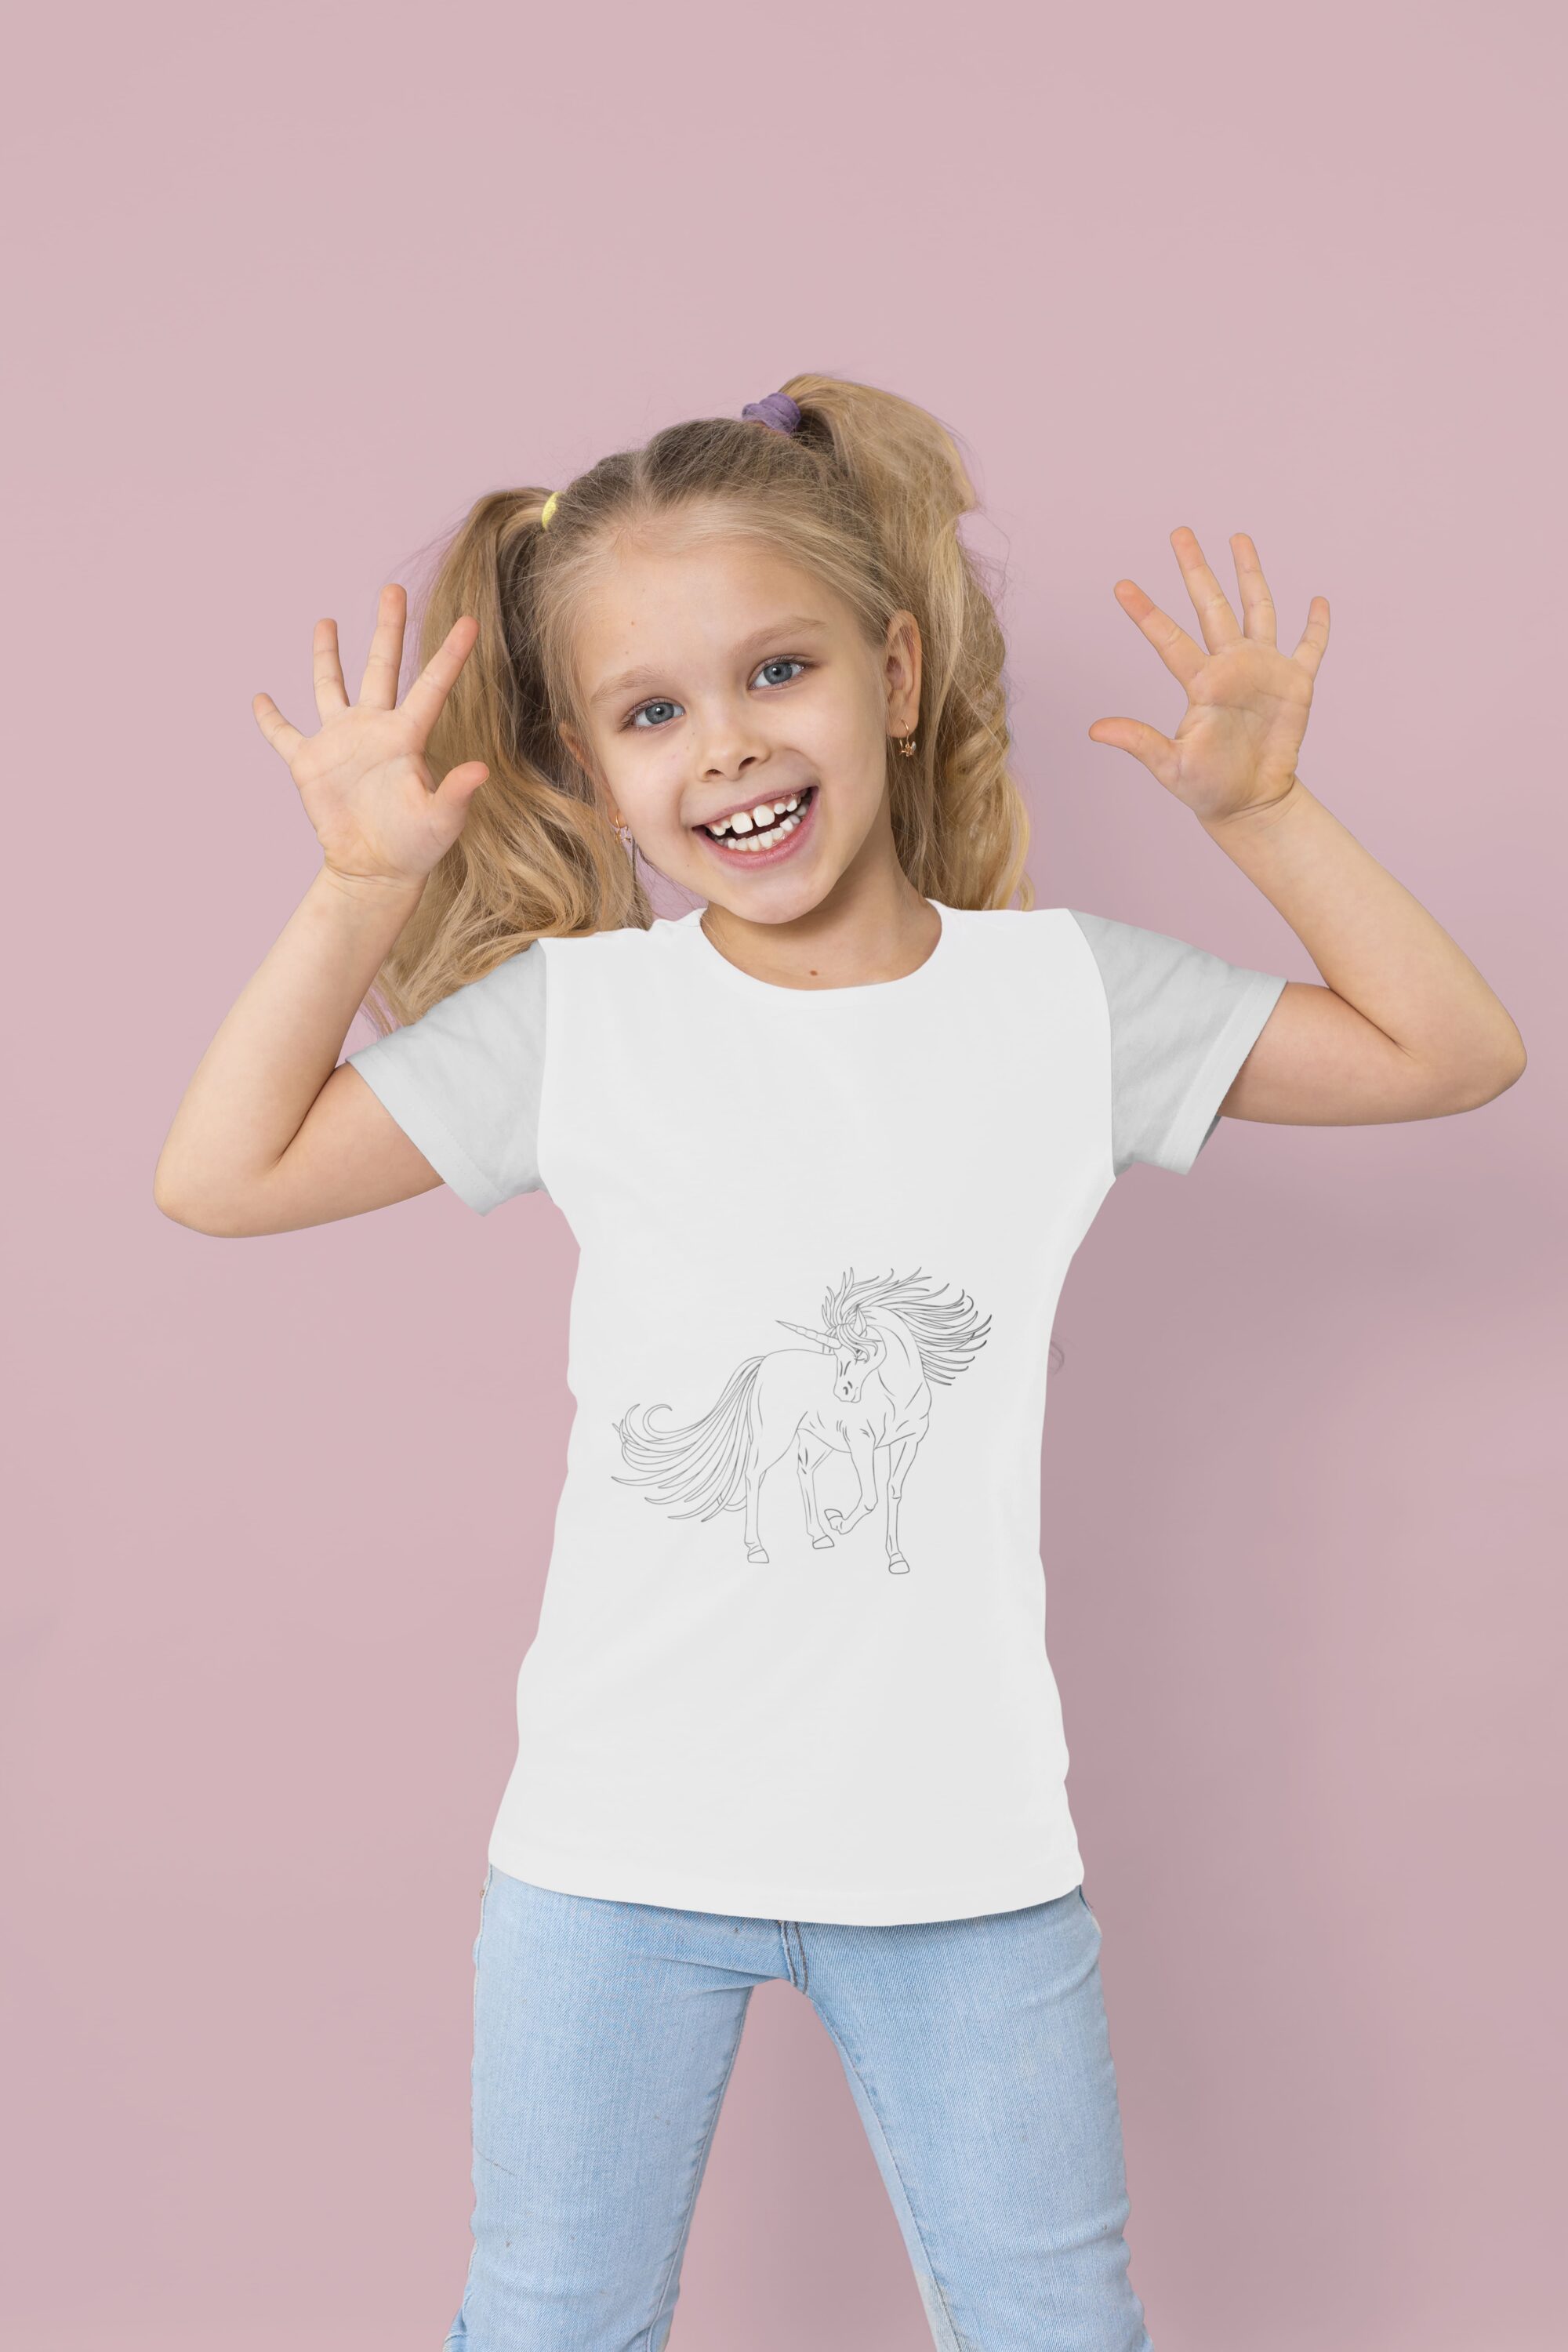 White t-shirt with gray sleeves and a gray unicorn, on a girl on a pink background.